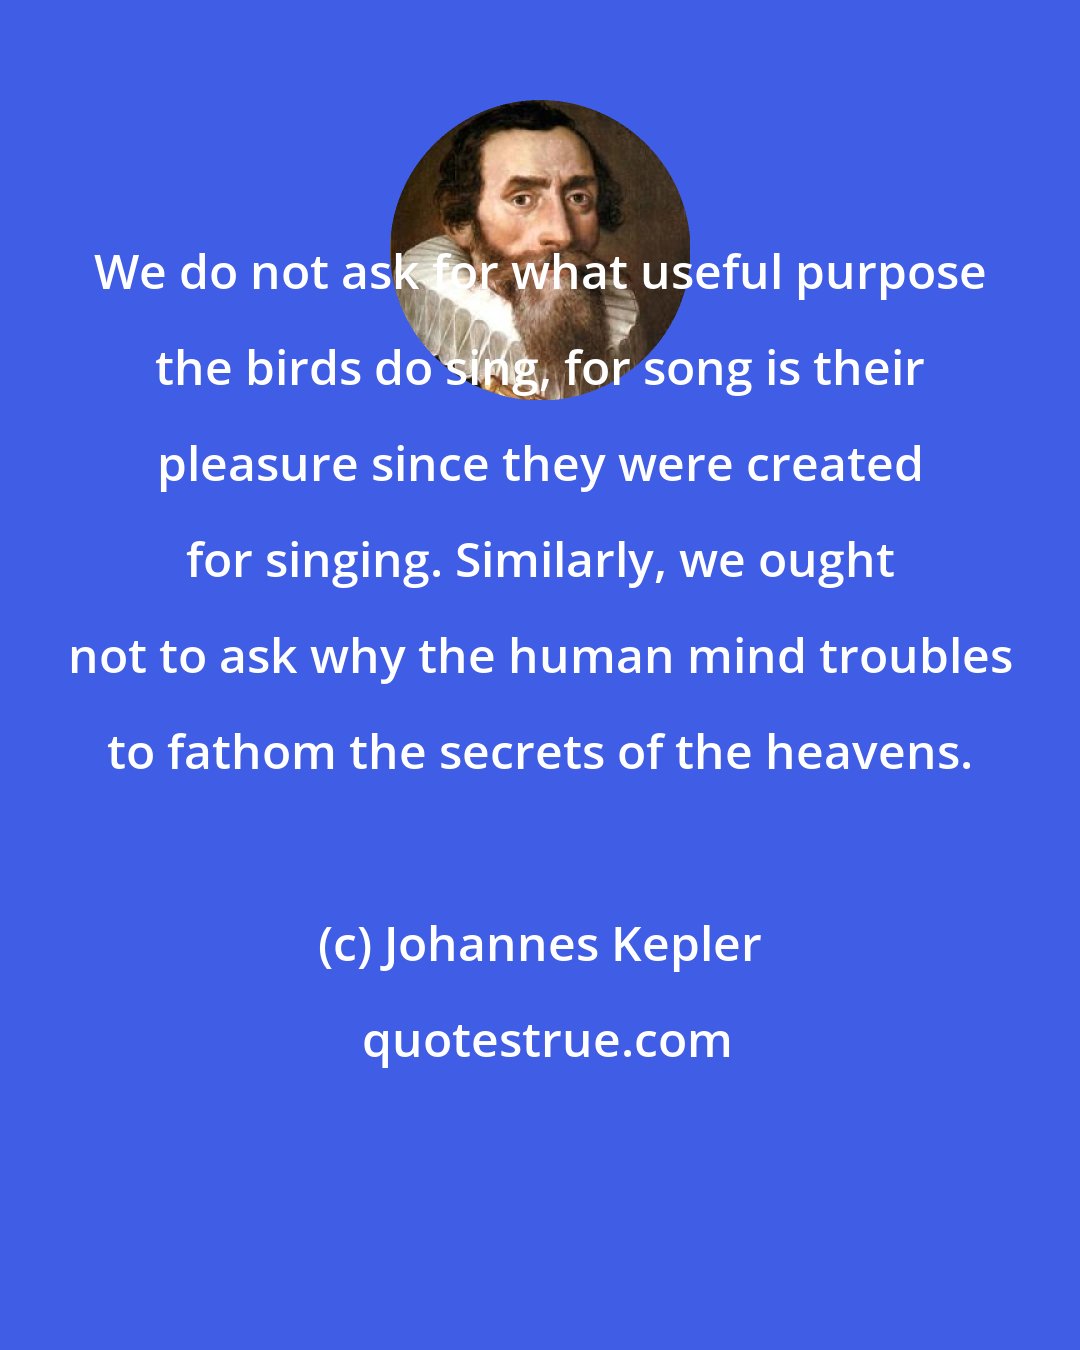 Johannes Kepler: We do not ask for what useful purpose the birds do sing, for song is their pleasure since they were created for singing. Similarly, we ought not to ask why the human mind troubles to fathom the secrets of the heavens.